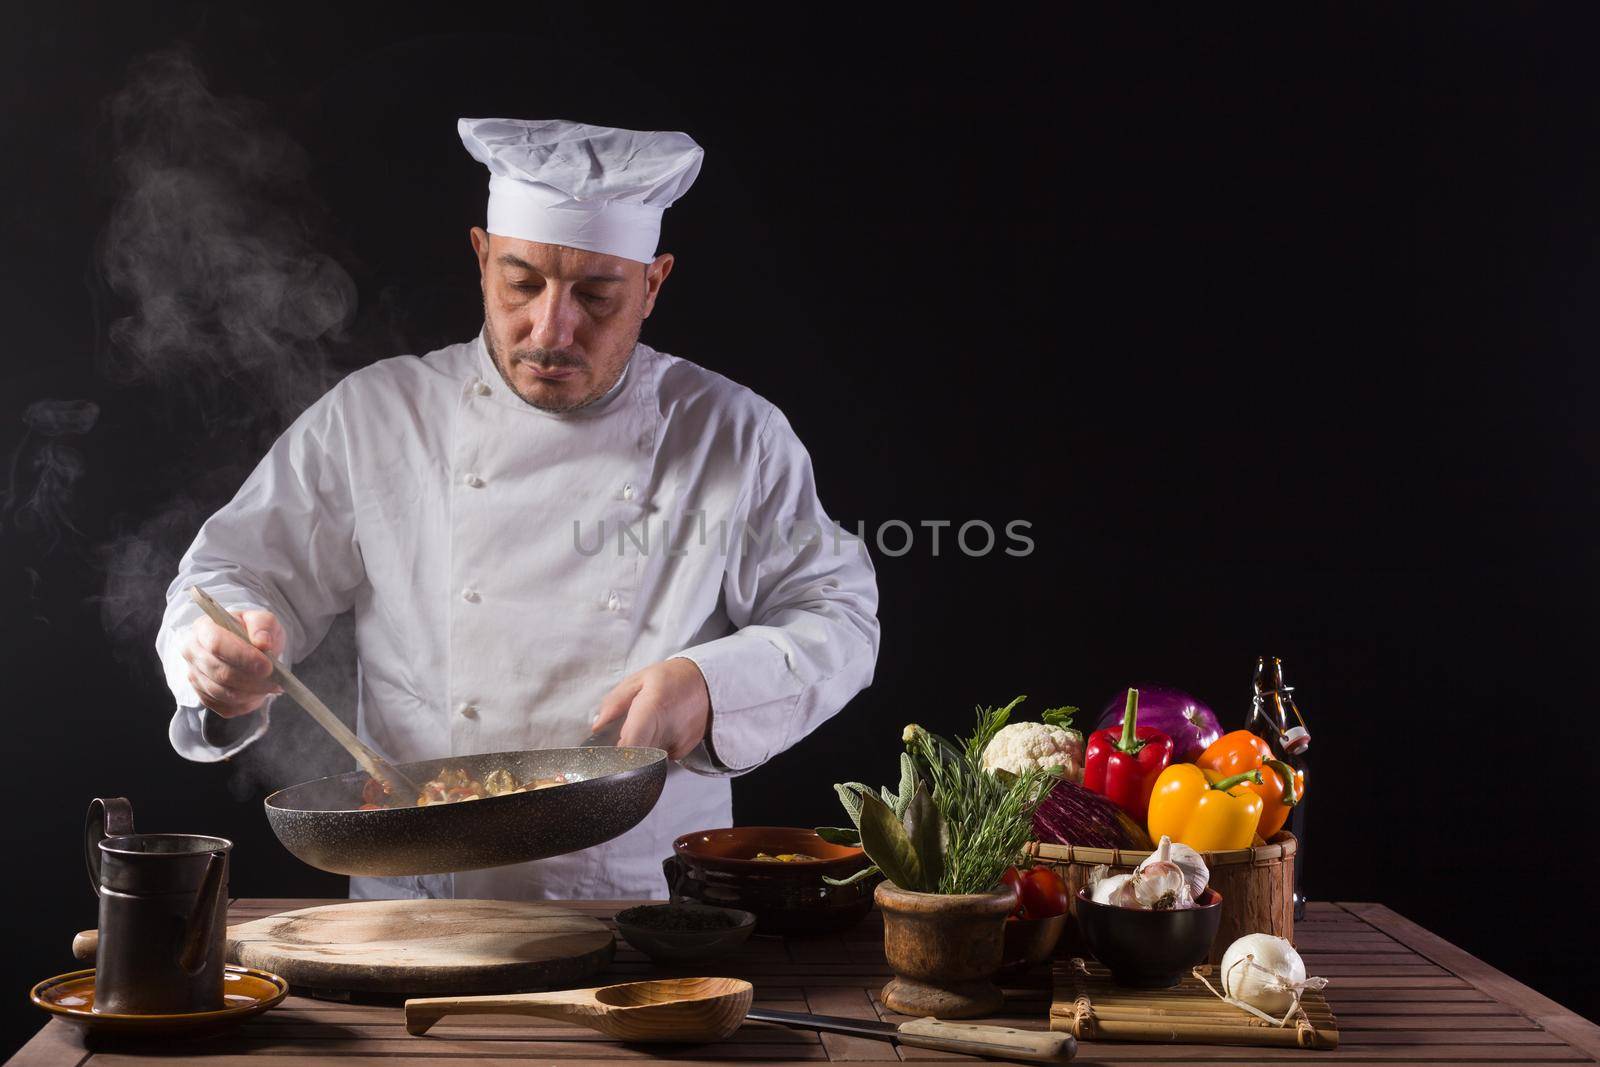 Male cook in white uniform and hat with ladle mixes the ingredients onto the cooking pan before serving while working in a restaurant kitchen